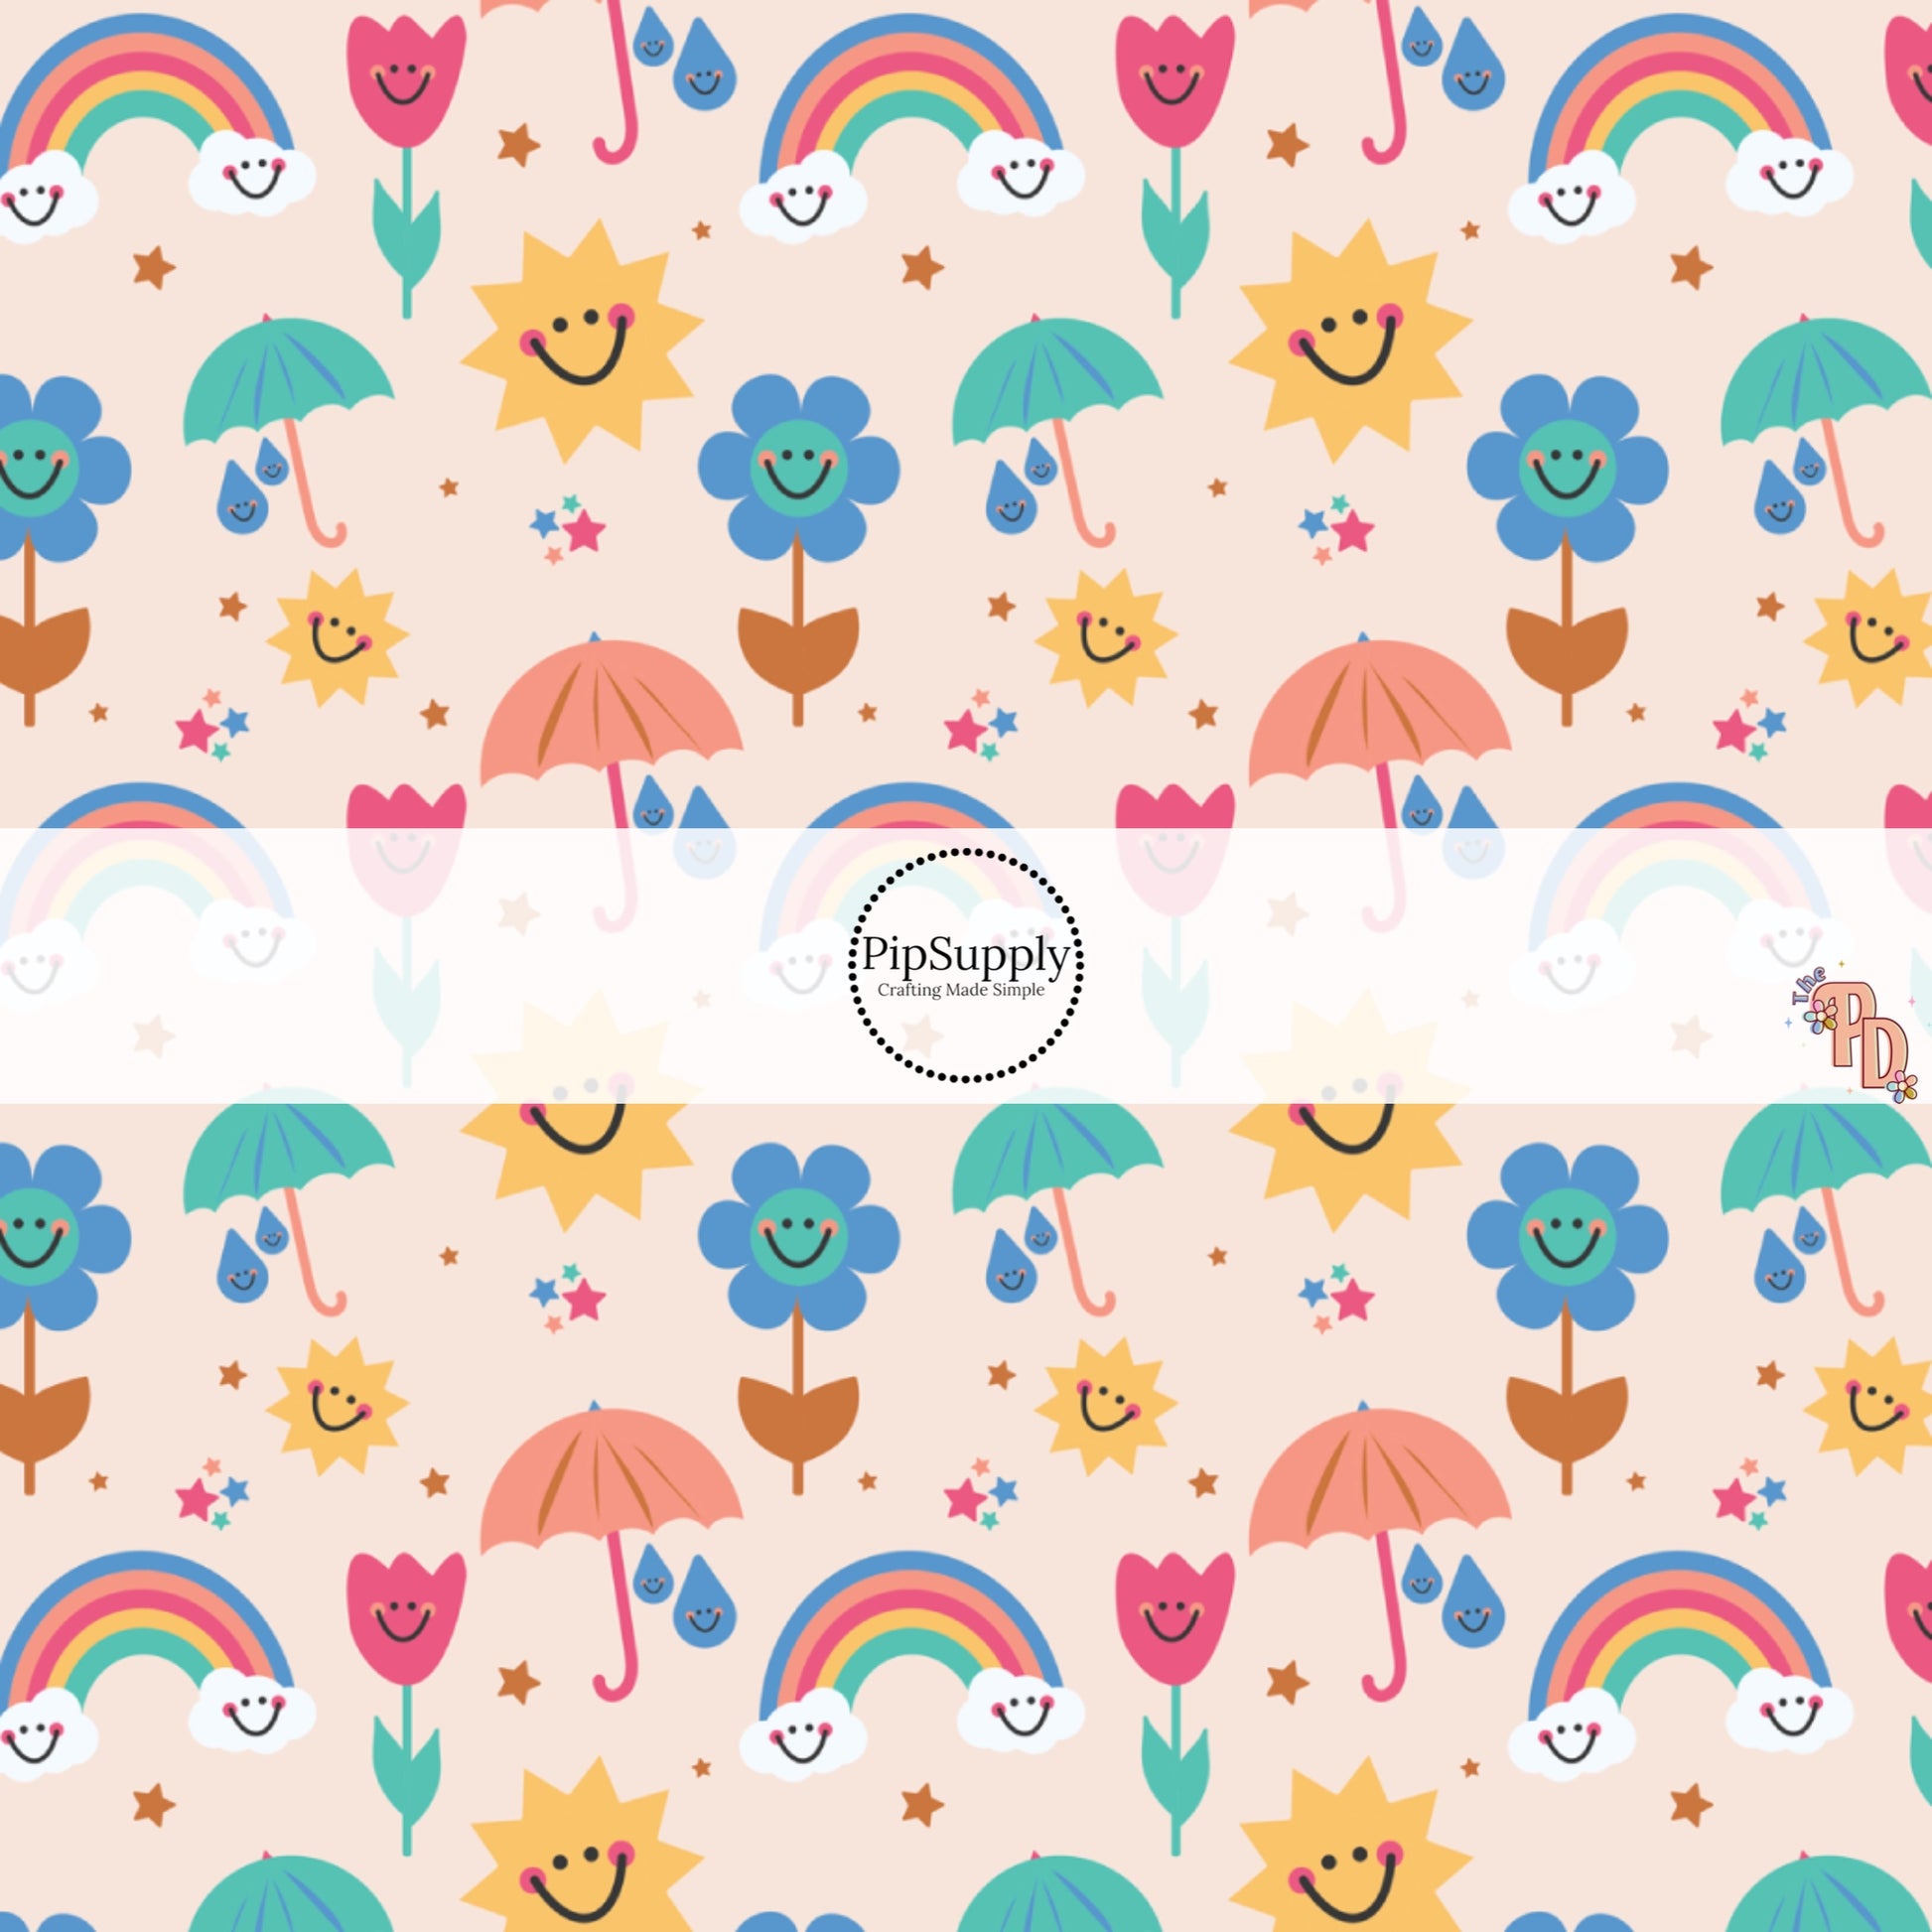 Smiley Face Flowers, Suns, Rainbows, Raindrops and Umbrellas on Cream Fabric by the Yard.